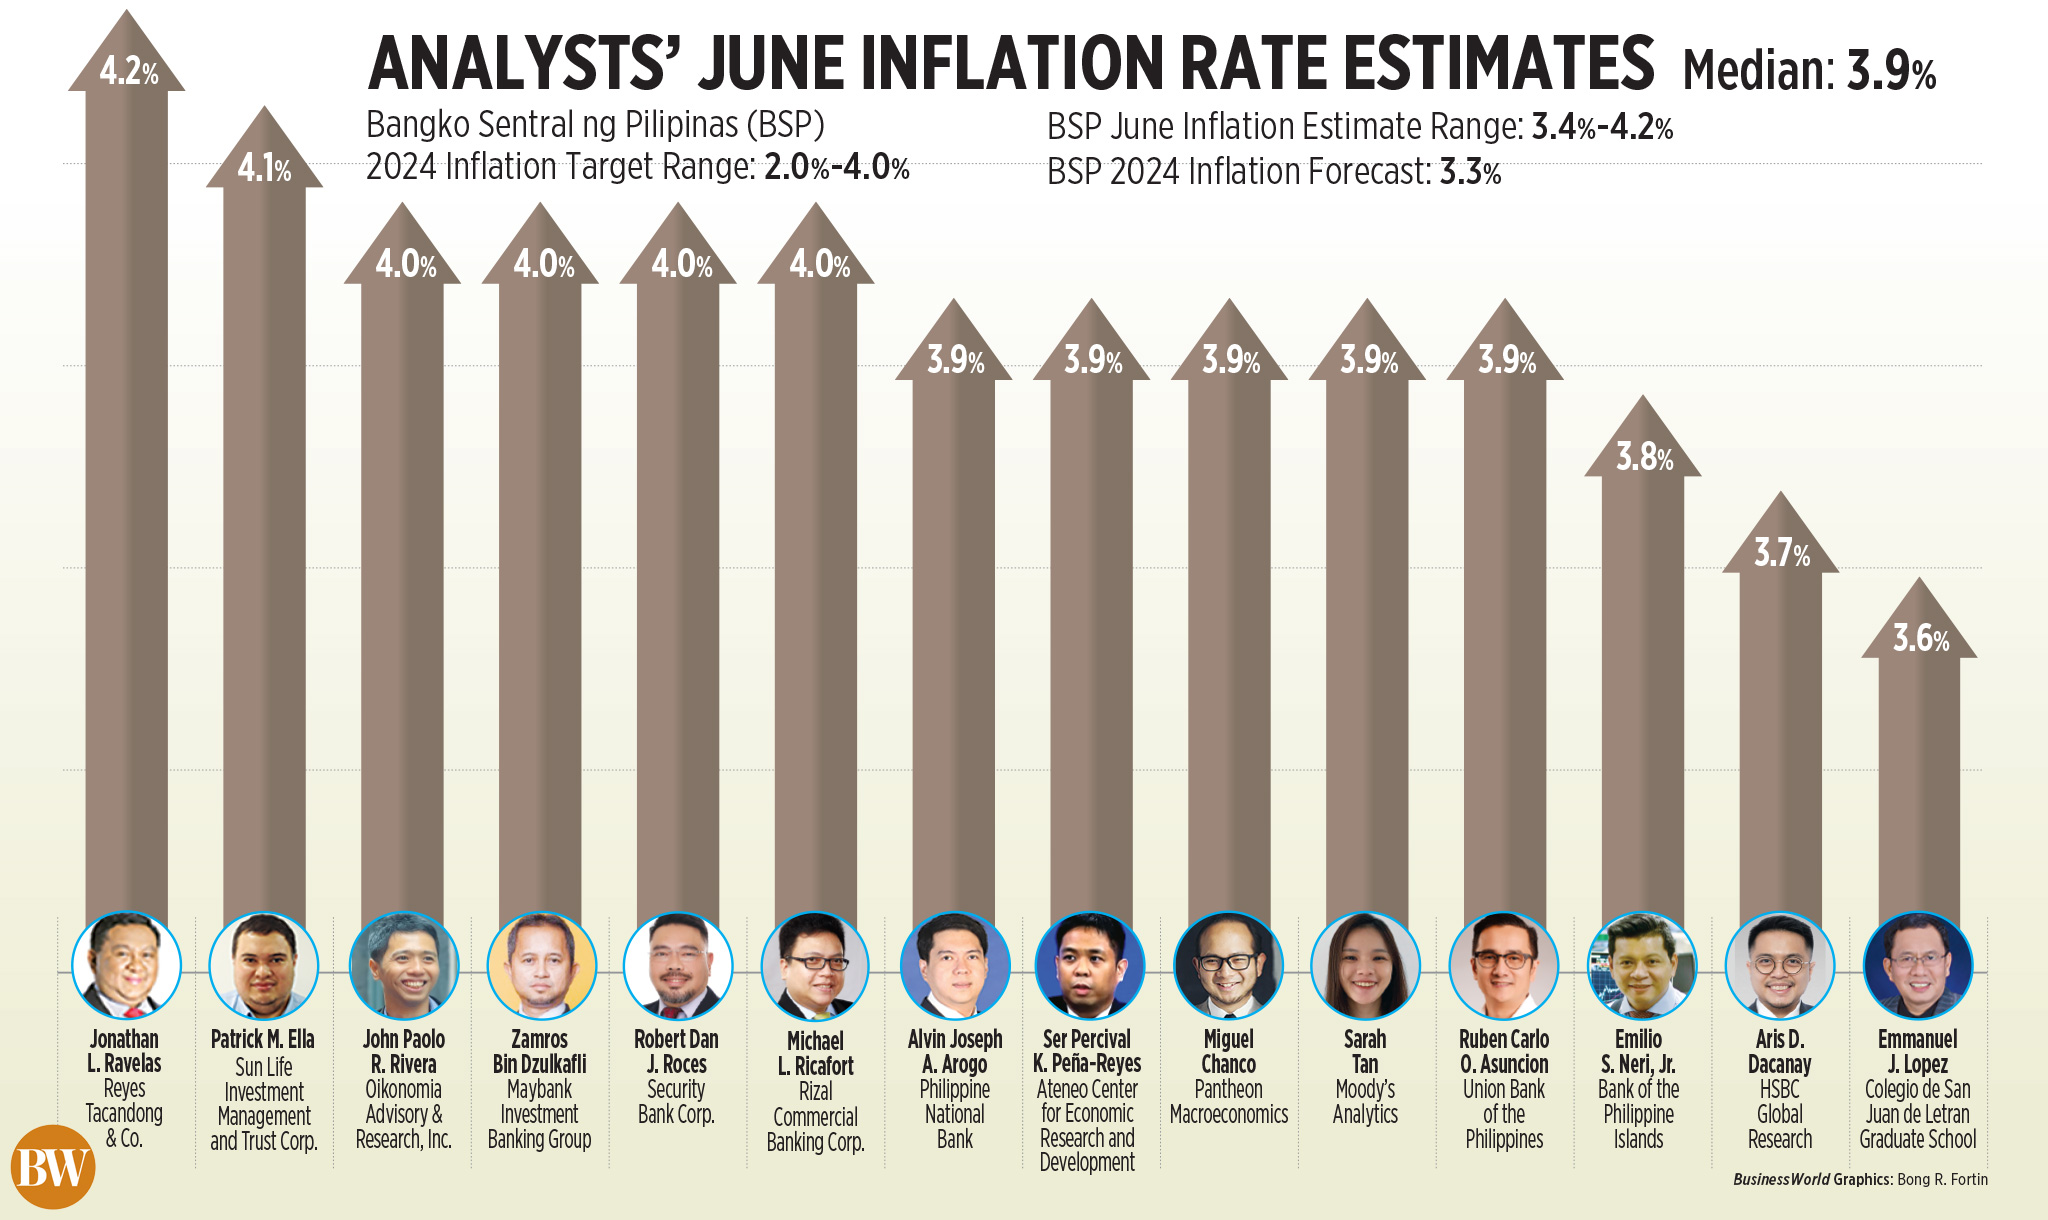 Analyst estimates of inflation in June